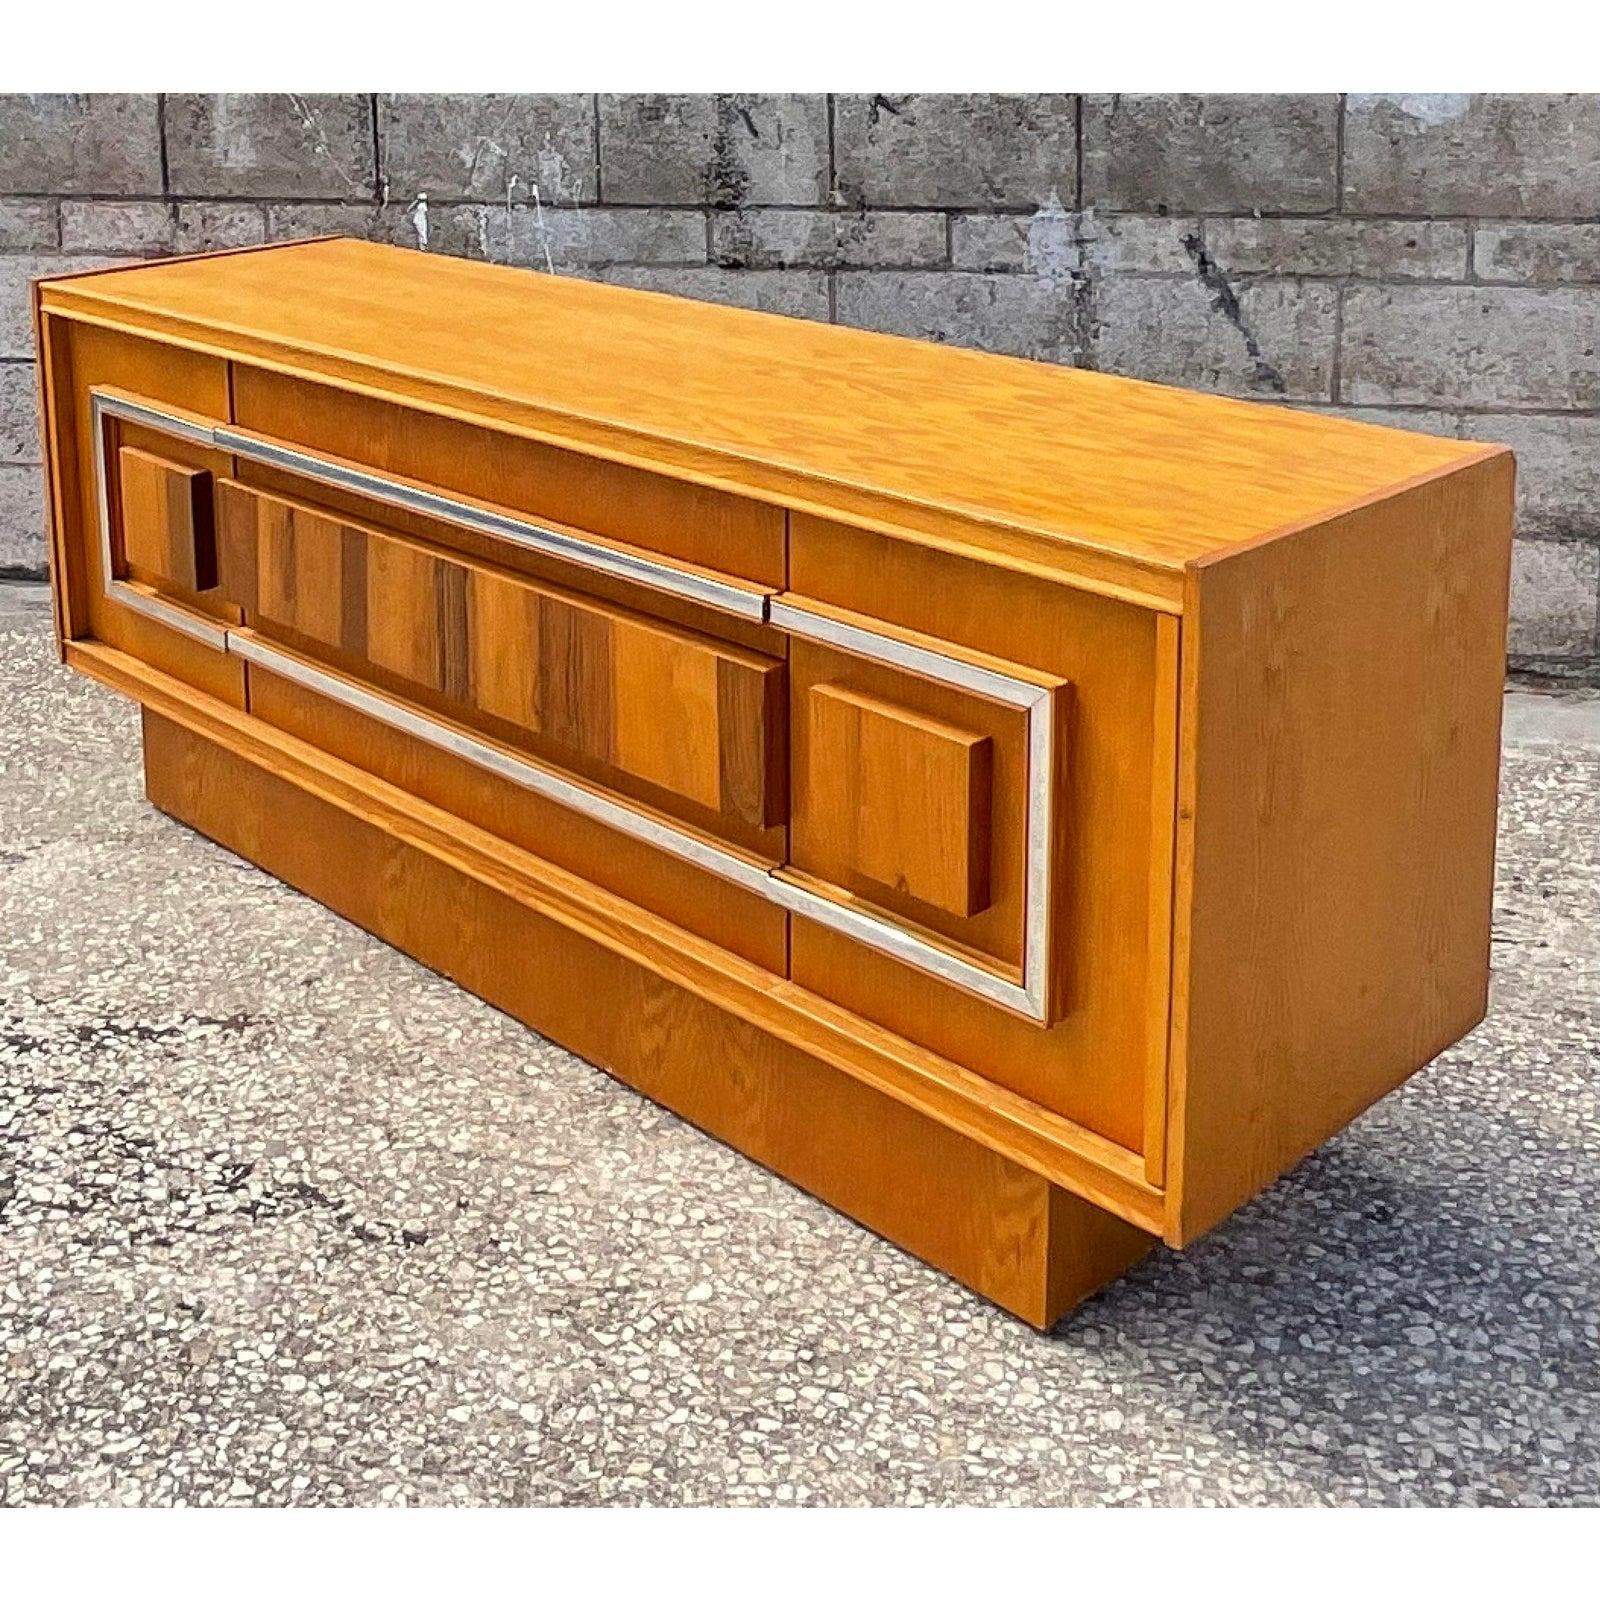 Vintage Mid-Century Modern Inset Wood Grain Panel Credenza In Good Condition For Sale In west palm beach, FL